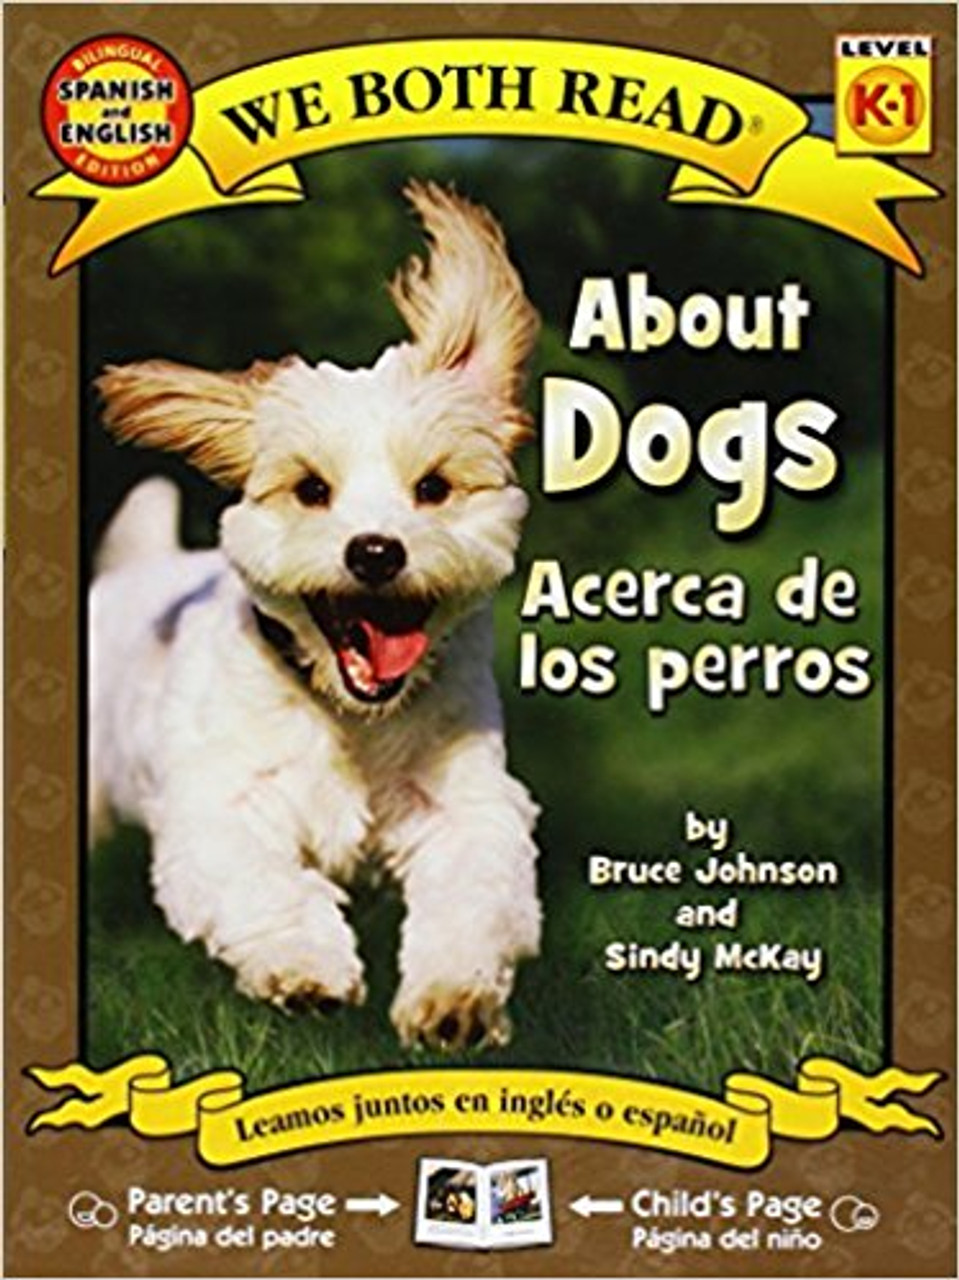 About Dogs/Acerca de los Perros by Bruce Johnson